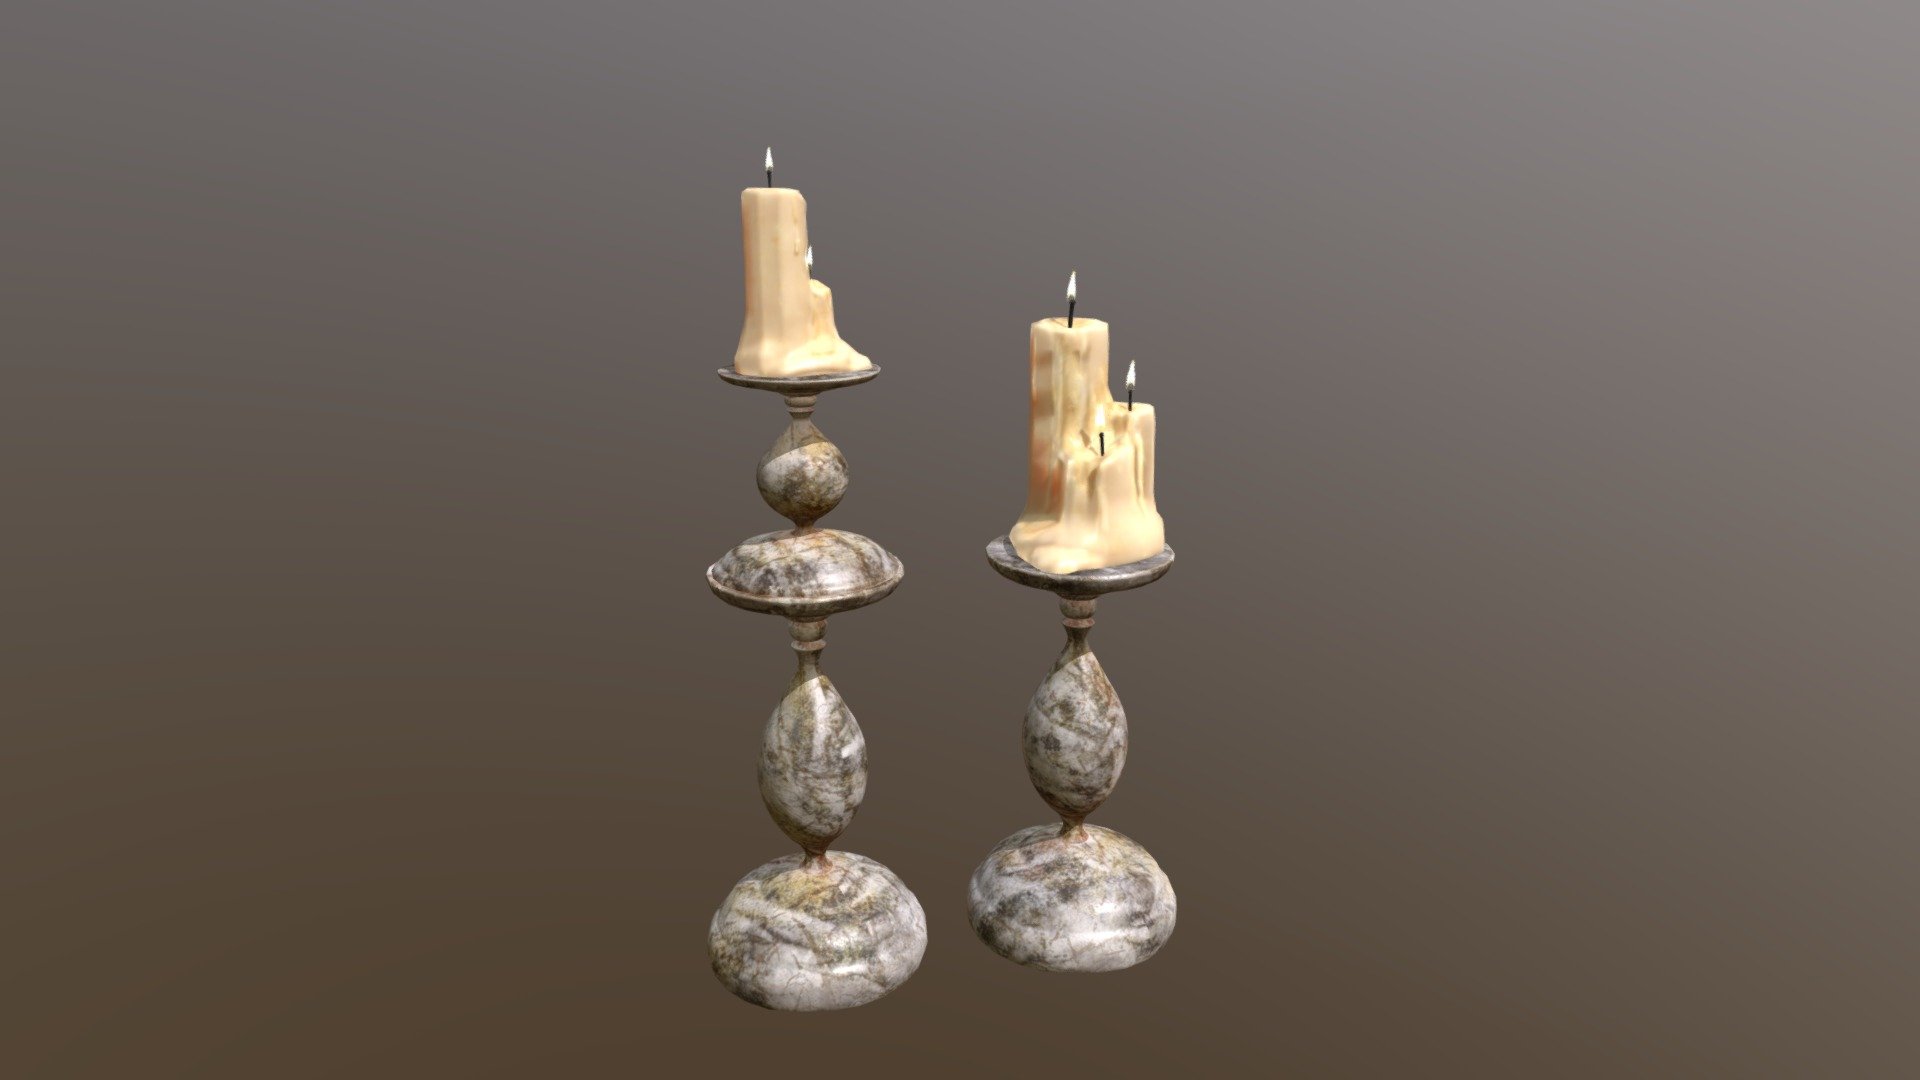 Lilac Elegant Marble Candlesticks 3D Model. This model contains the Lilac Elegant Marble Candlesticks itself 

All modeled in Maya, textured with Substance Painter.

The model was built to scale and is UV unwrapped properly. 

Contains TWO (2) Texture Sets: One for the candle and one for the Candle Holder  

⦁   15798 tris. 

⦁   Contains: .FBX .OBJ and .DAE

⦁   Model has clean topology. No Ngons.

⦁   Built to scale

⦁   Unwrapped UV Map

⦁   4K Texture set

⦁   High quality details

⦁   Based on real life references

⦁   Renders done in Marmoset Toolbag

Polycount: 

Verts 8003

Edges 15938

Faces 7960

Tris 15798

If you have any questions please feel free to ask me 3d model